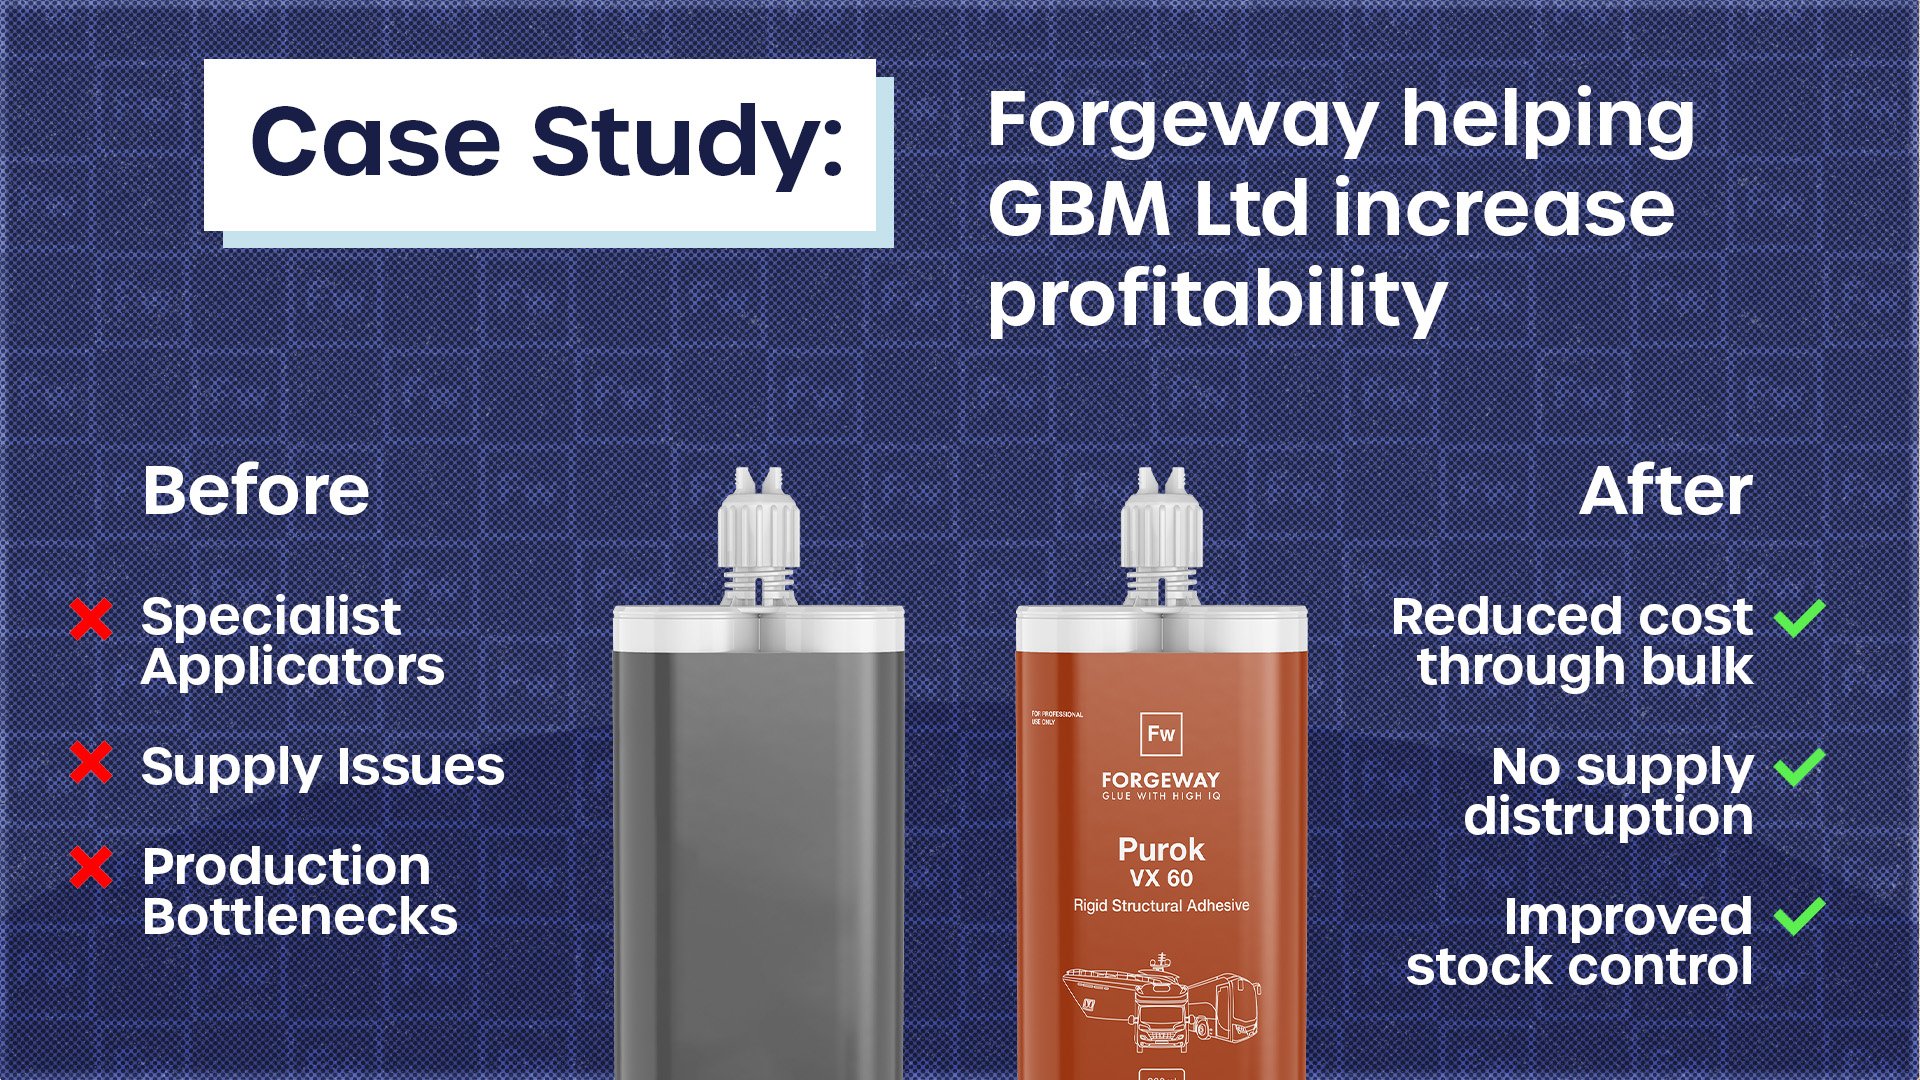 How Forgeway helped GBM Ltd cut costs and improve supply chain issues